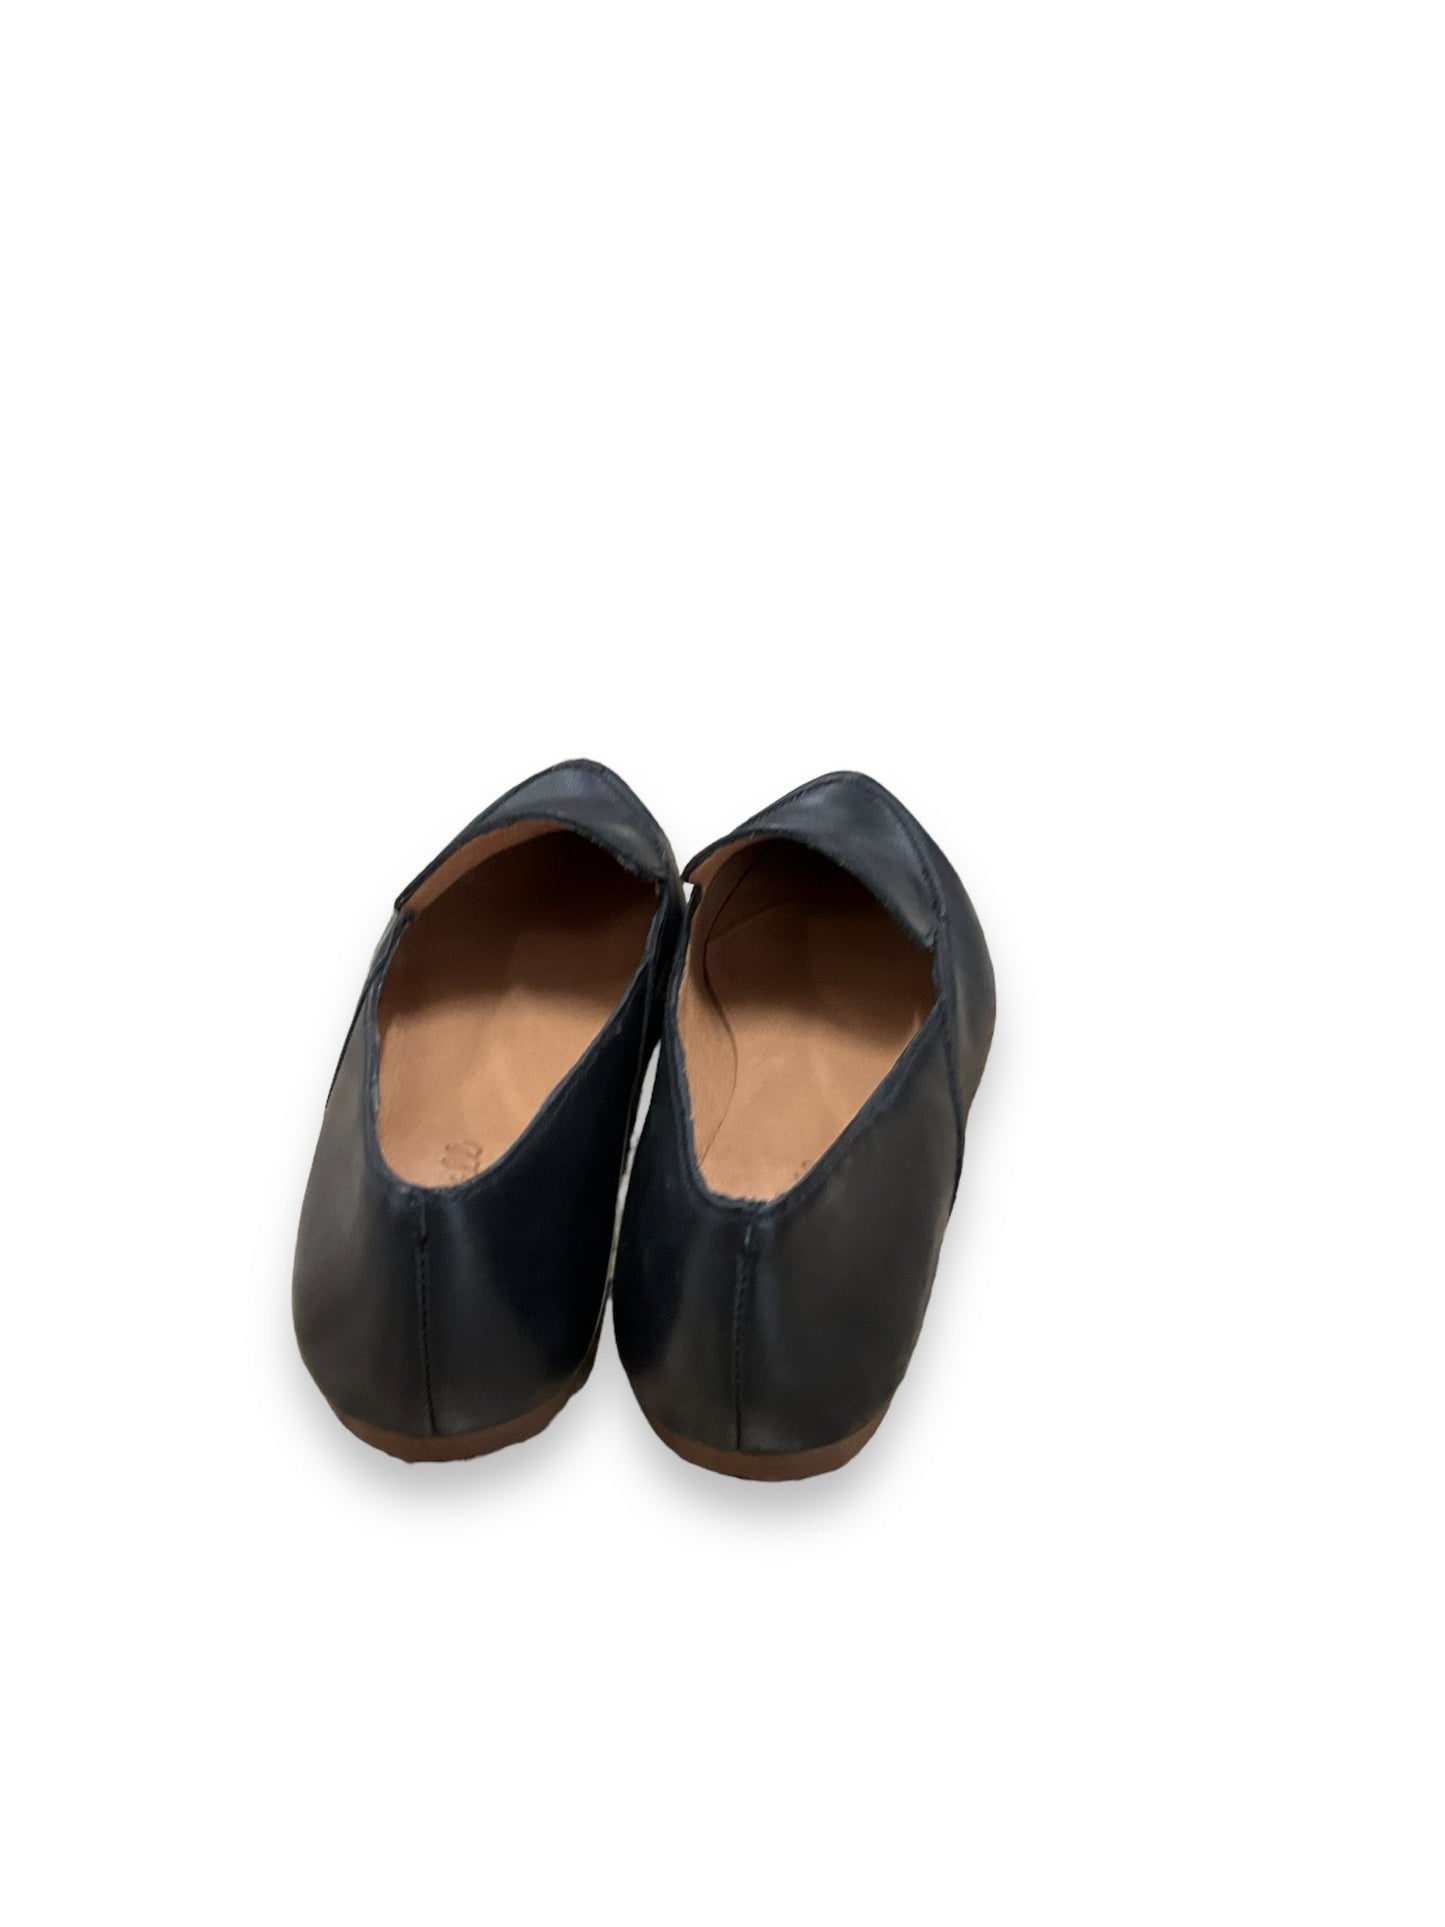 Black Shoes Flats Madewell, Size 7